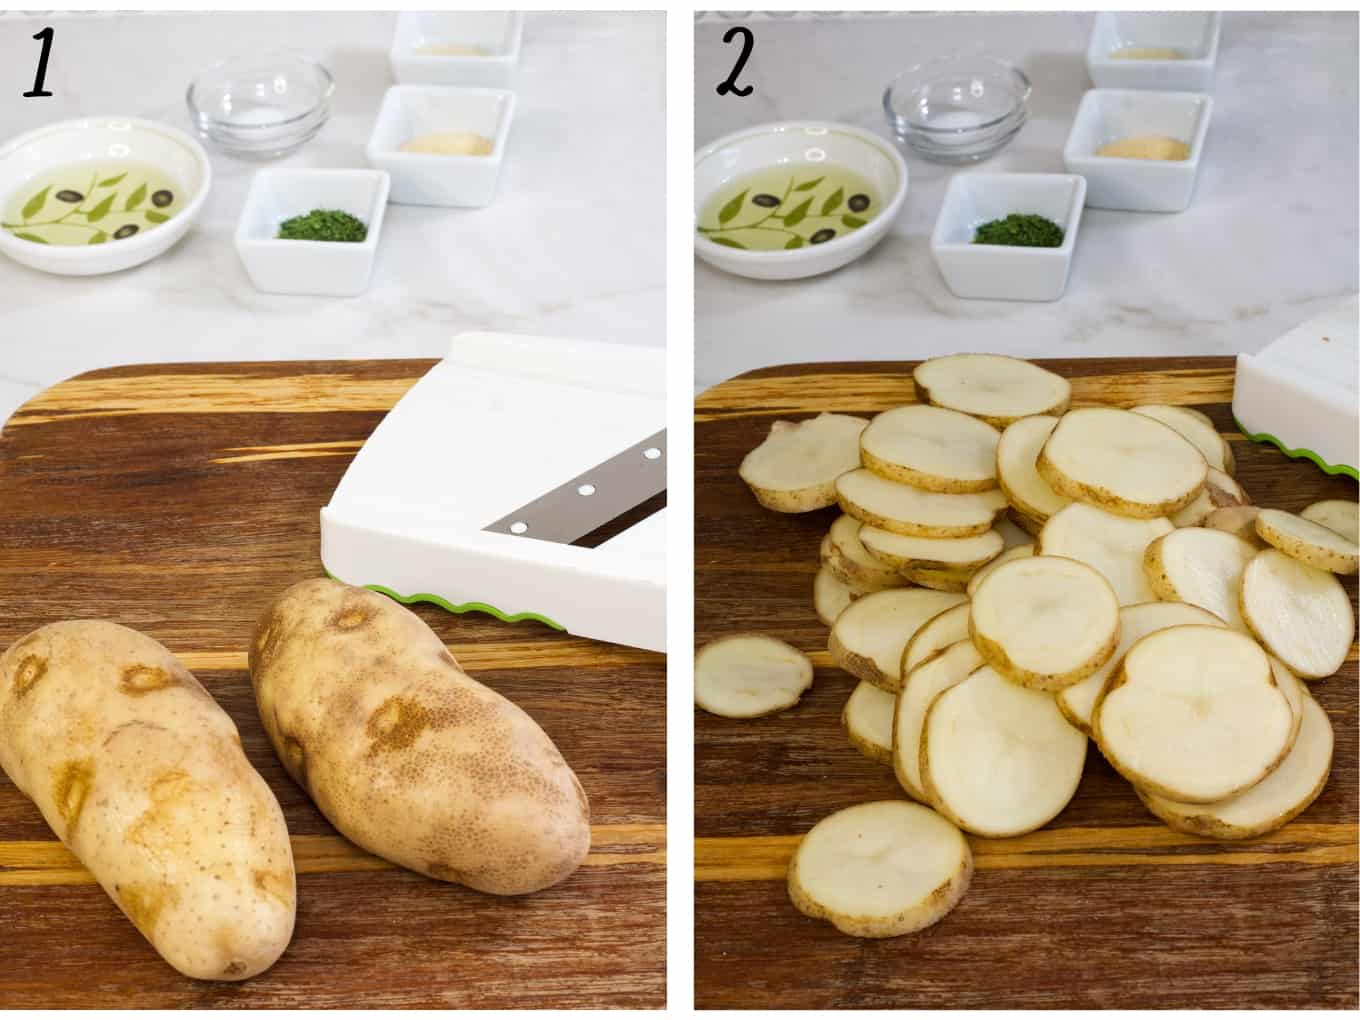 Side by side images of the potatoes on a cutting board, uncut and cut.